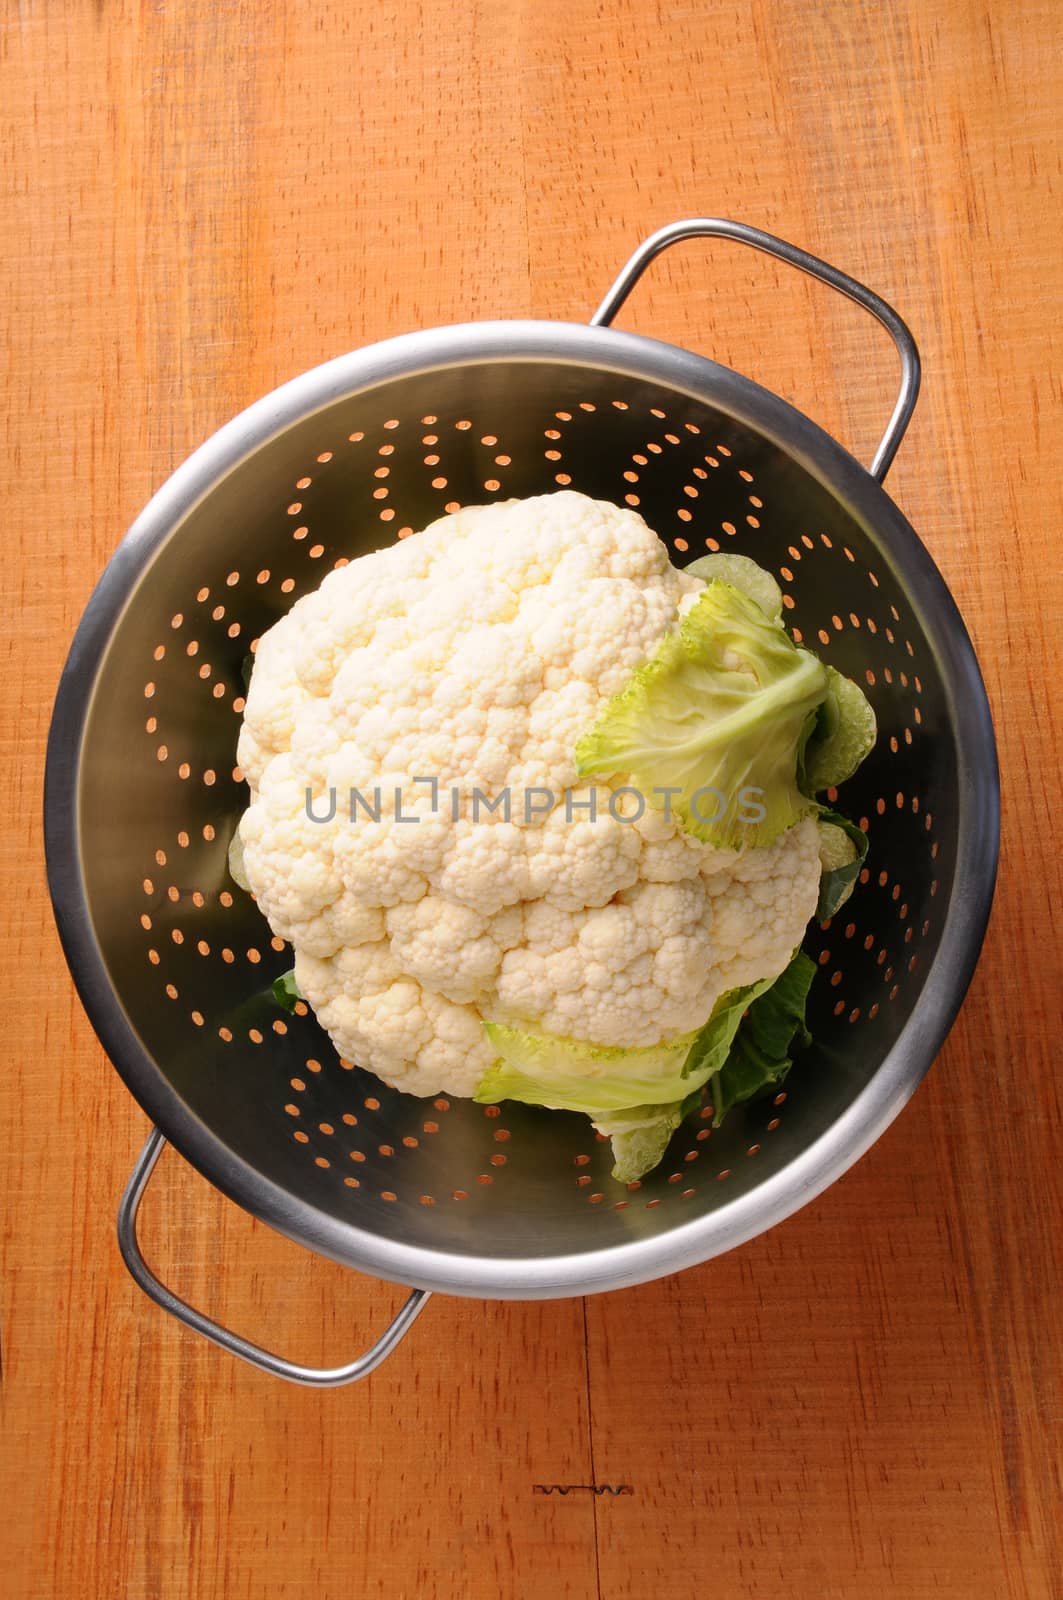 Fresh picked cauliflower in a metal colander on rustic wooden table. Vertical format shot from a high angle.